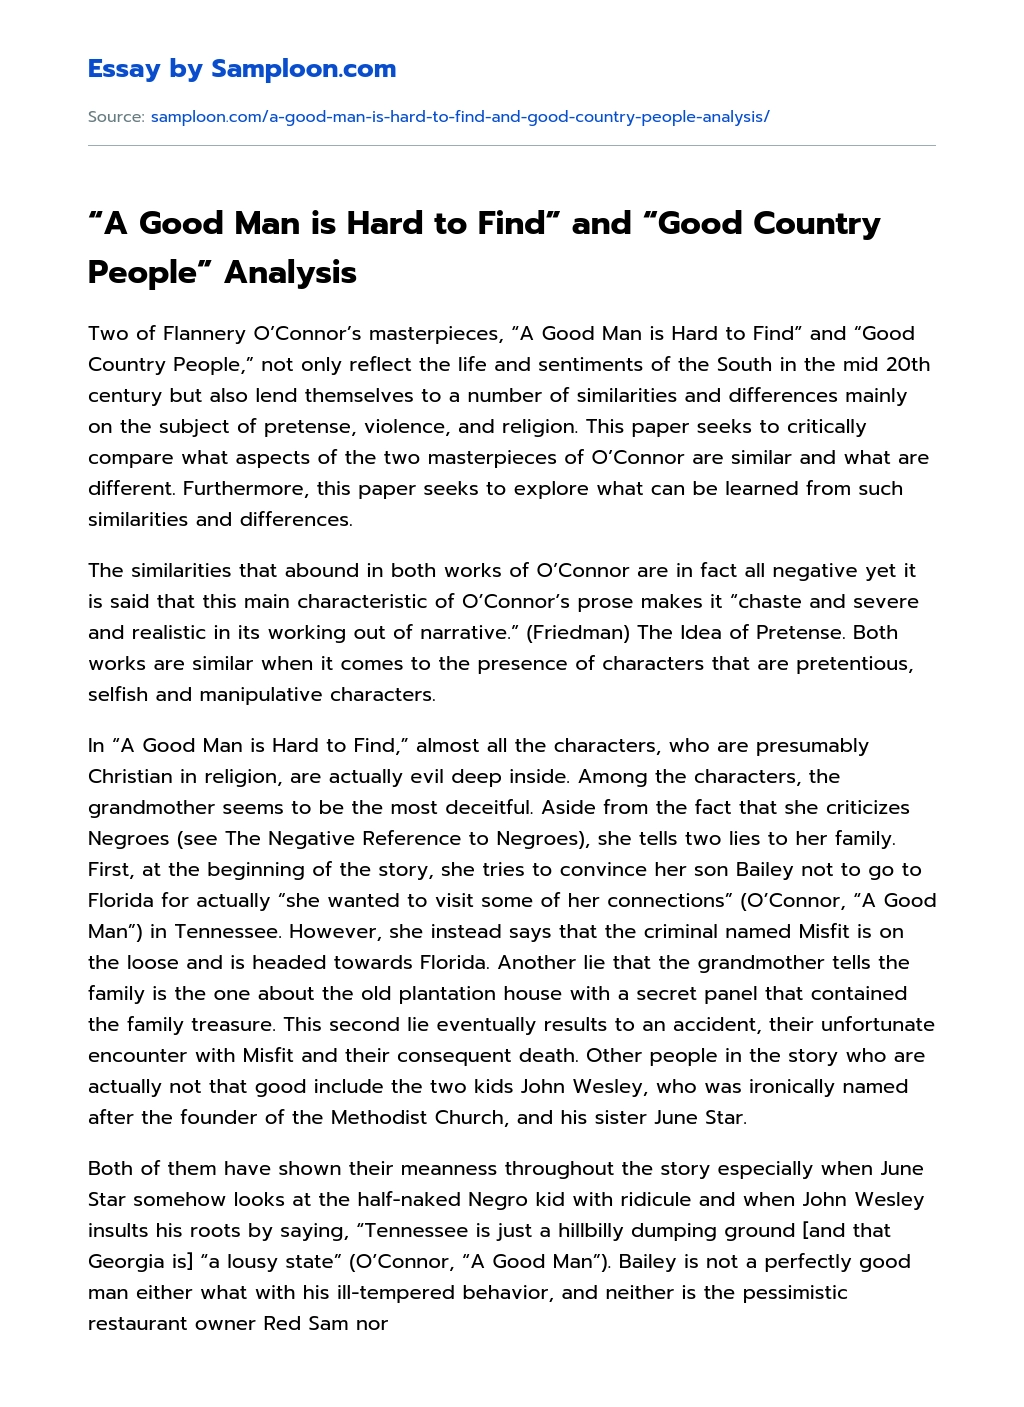 “A Good Man is Hard to Find” and “Good Country People” Analysis essay